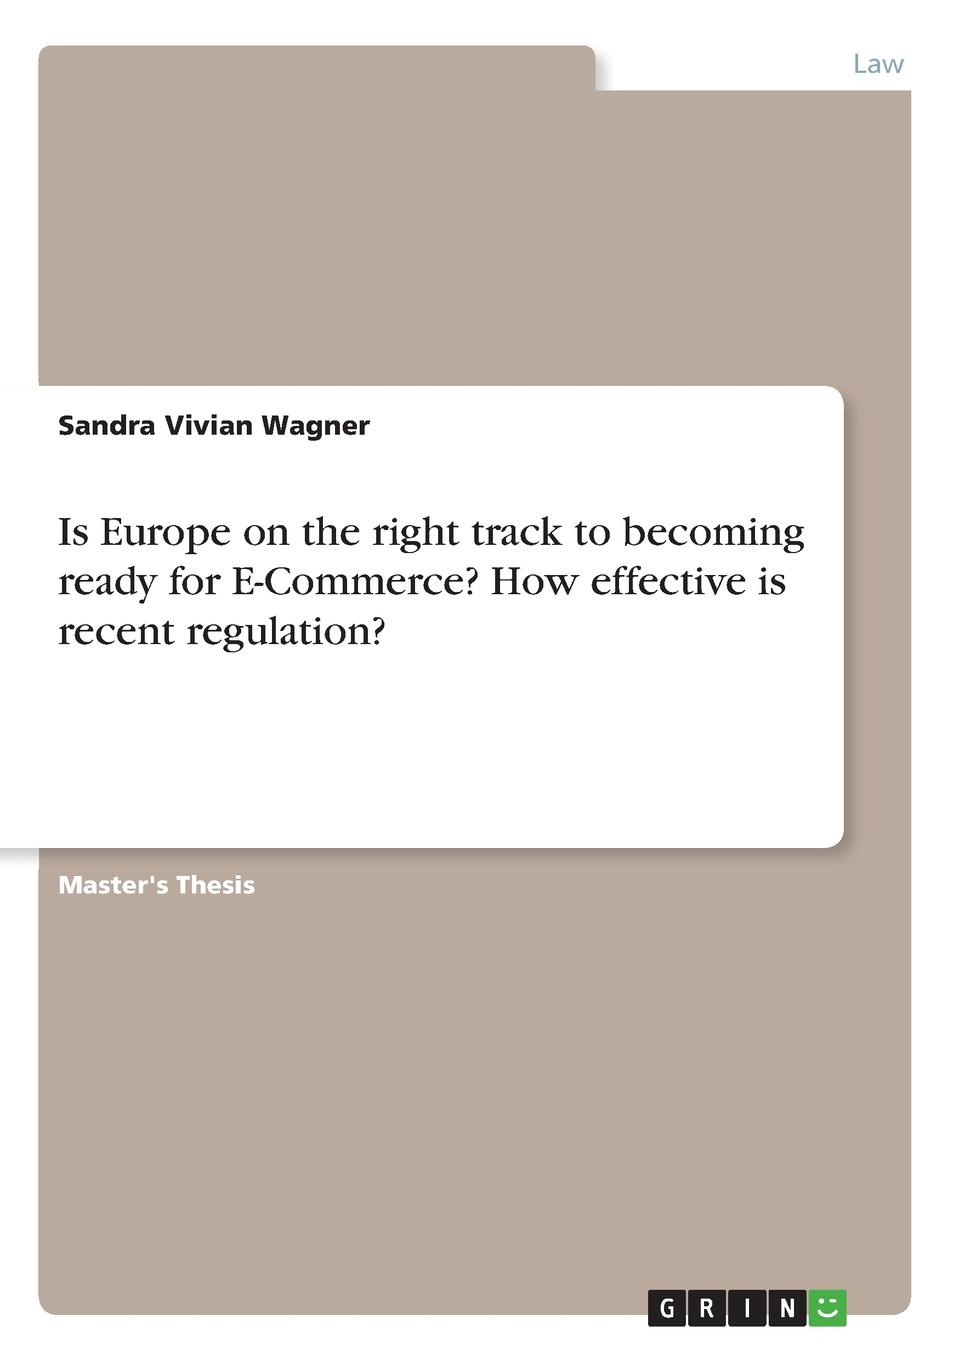 Is Europe on the right track to becoming ready for E-Commerce. How effective is recent regulation.